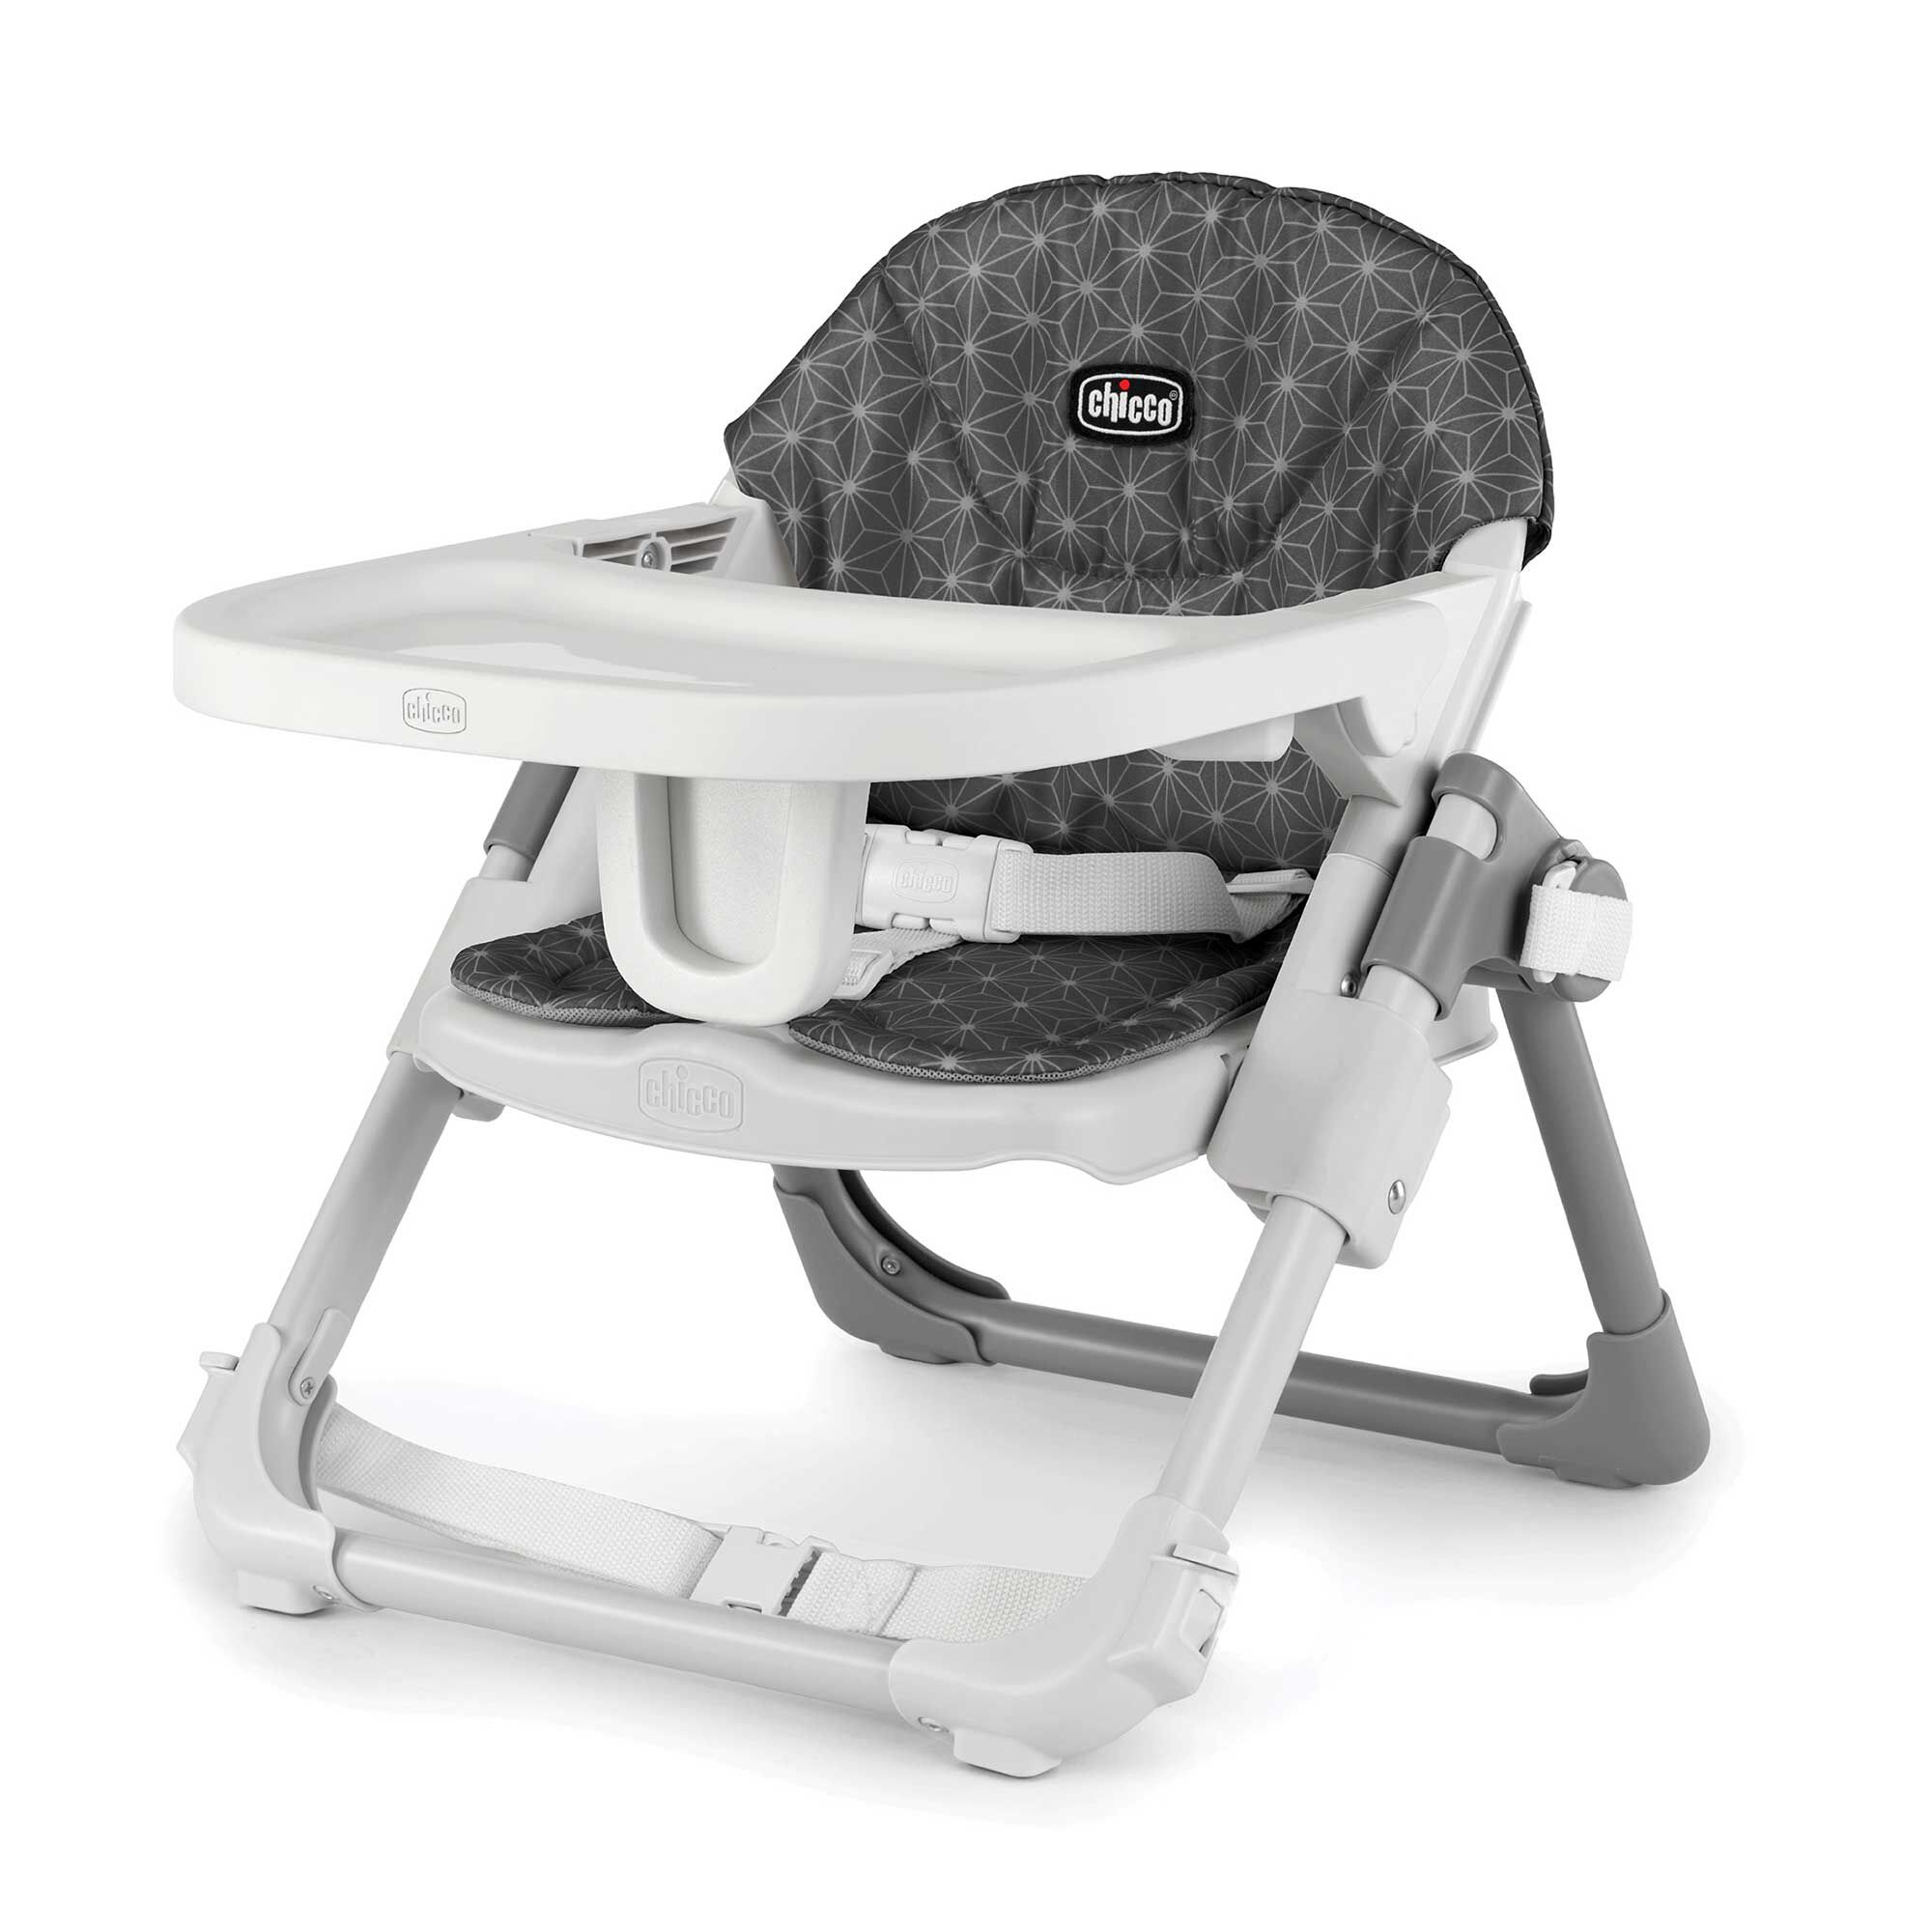 Skip Hop Booster Seat for Dining Table, Sleek Seat Booster, Grey/White